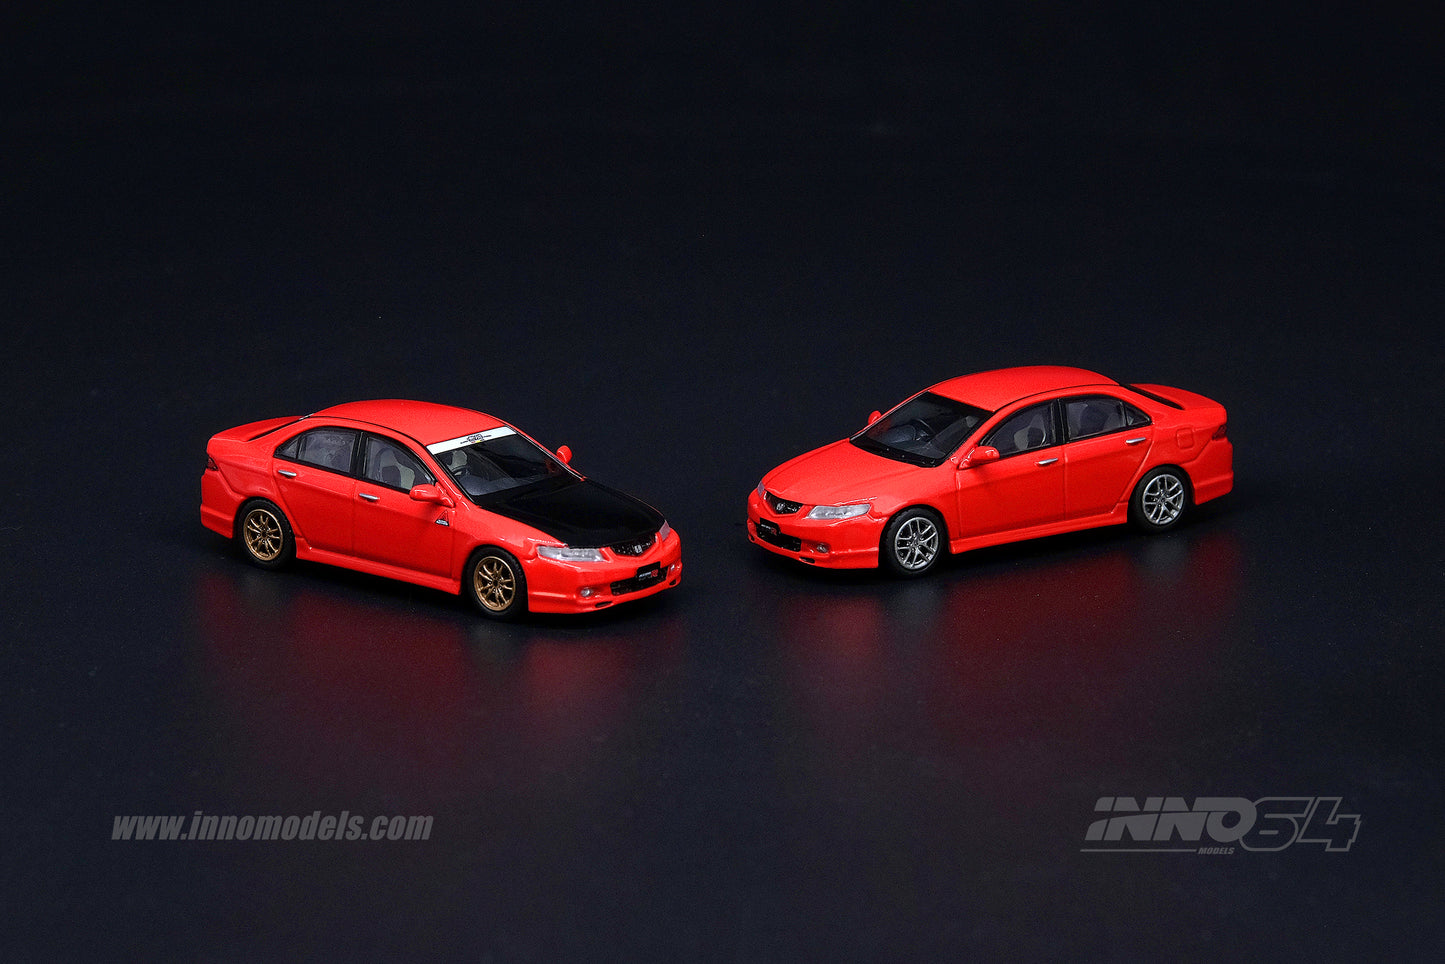 Inno64 1:64 HONDA ACCORD Euro-R CL7 Milano Red  With extra wheels and Decals